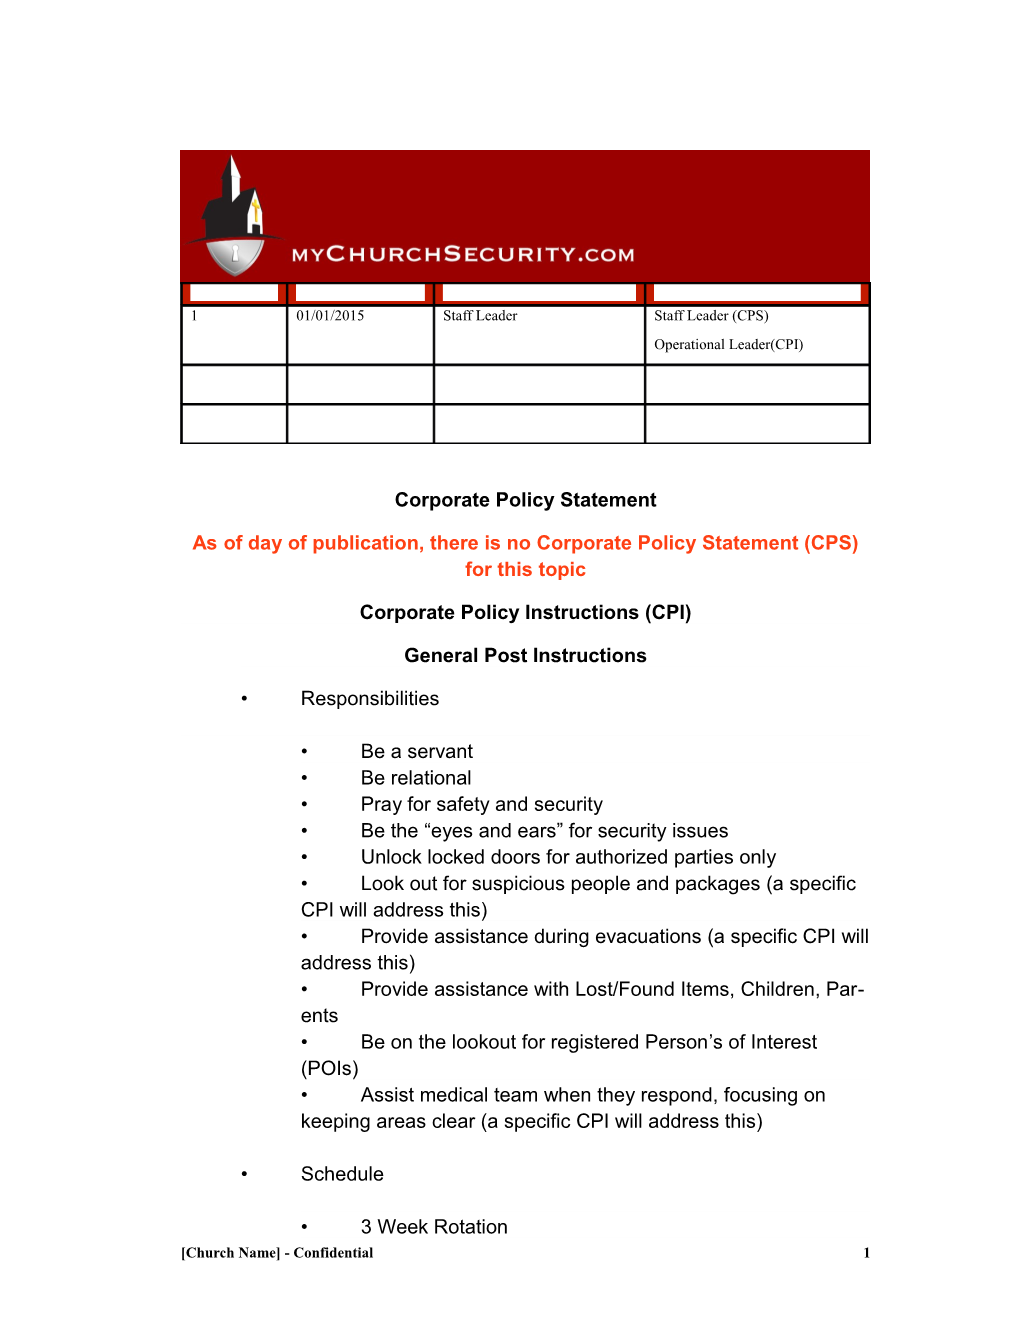 As of Day of Publication, There Is No Corporate Policy Statement (CPS) for This Topic